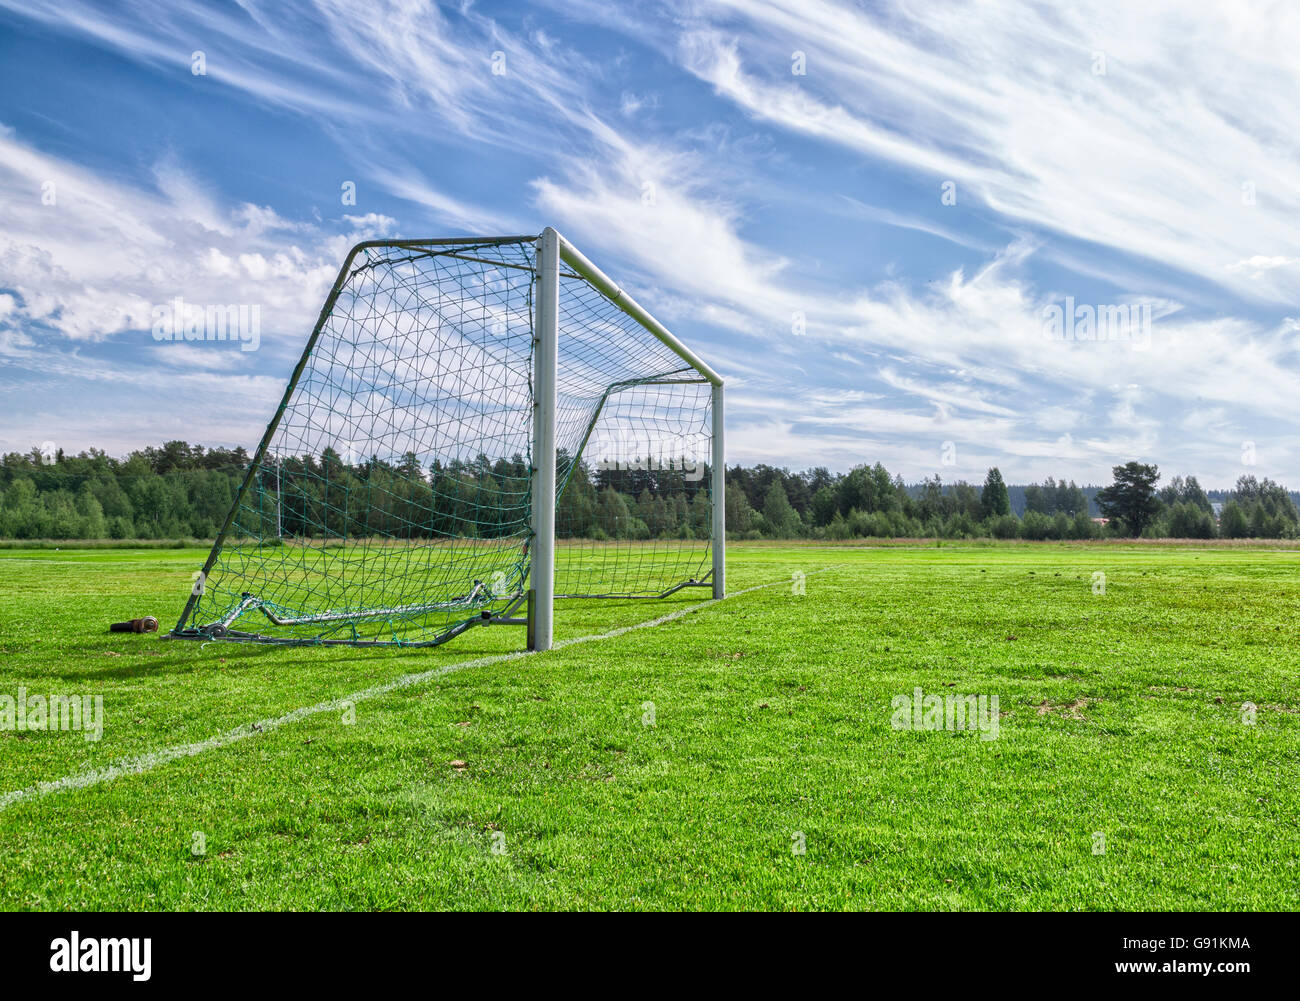 Soccer Goal on Soccer Pitch with a partly cloudy sky and trees. Stock Photo